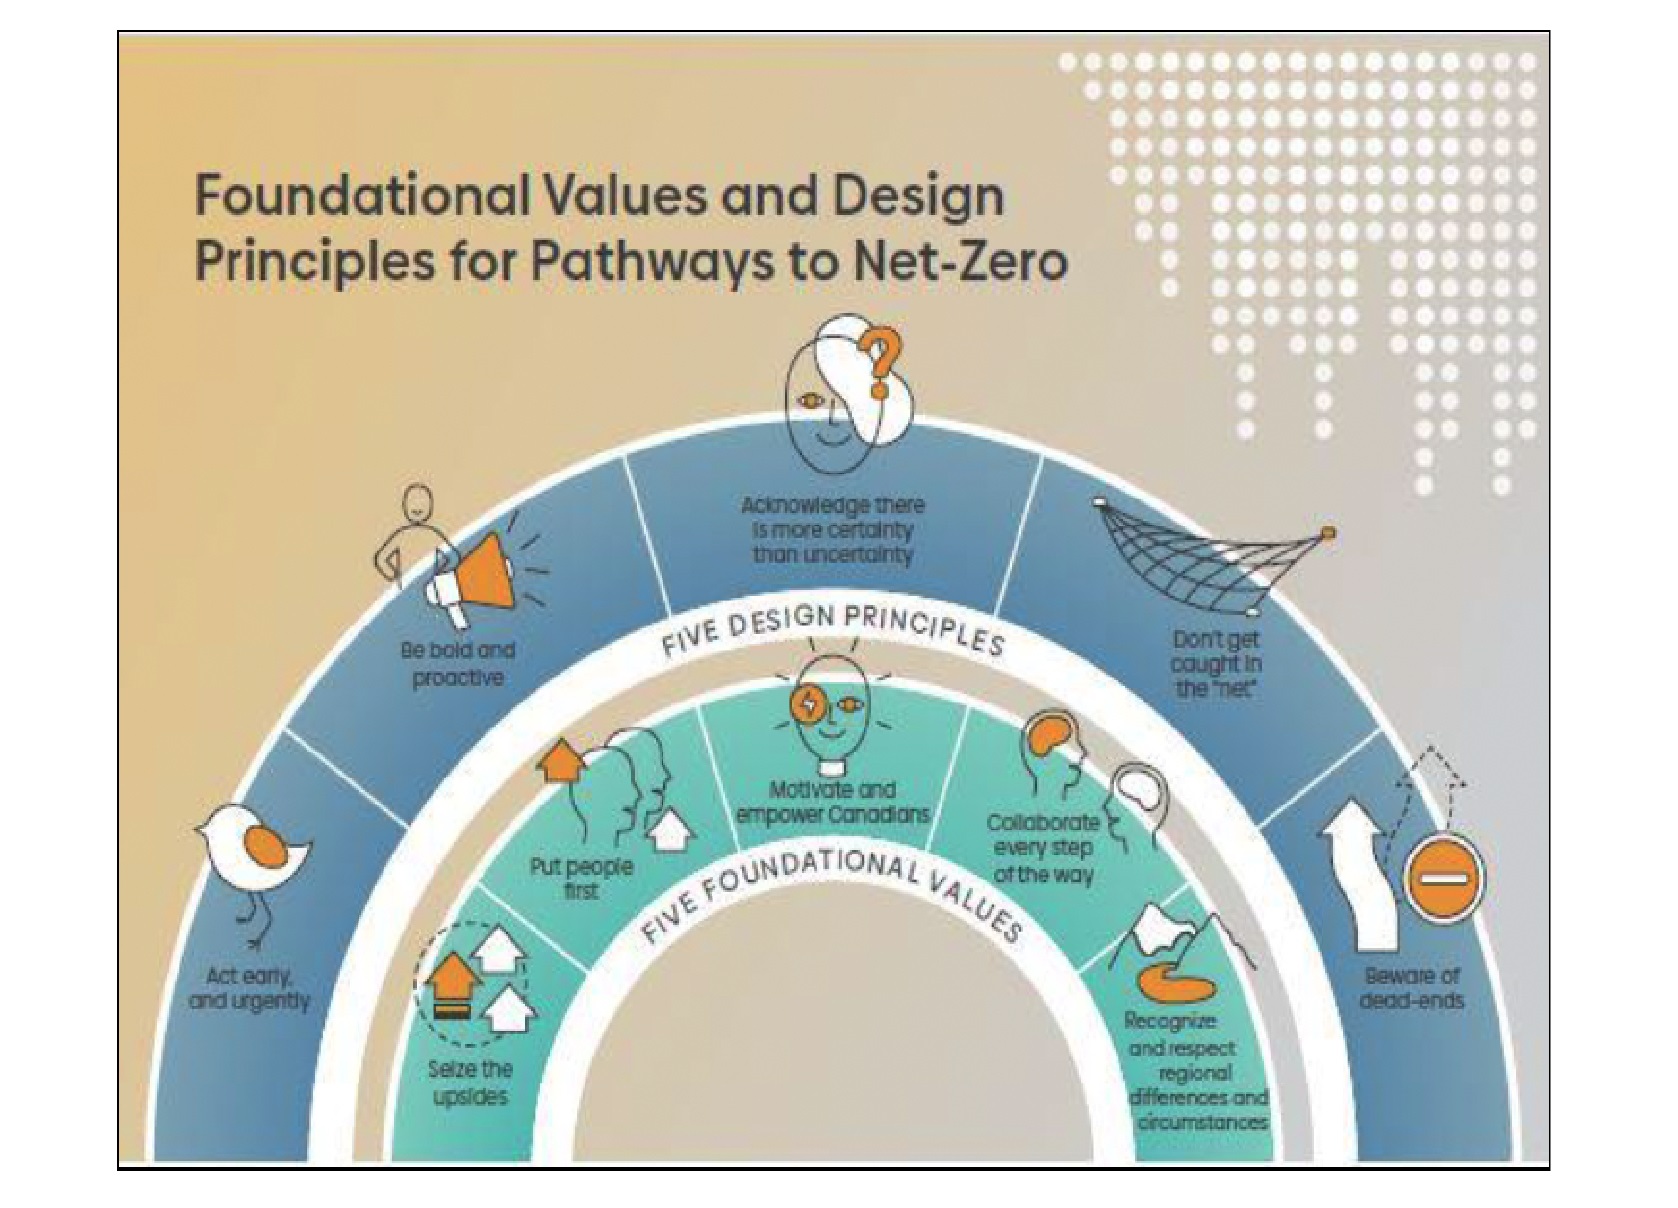 Foundational values and design principles for pathways to net-zero